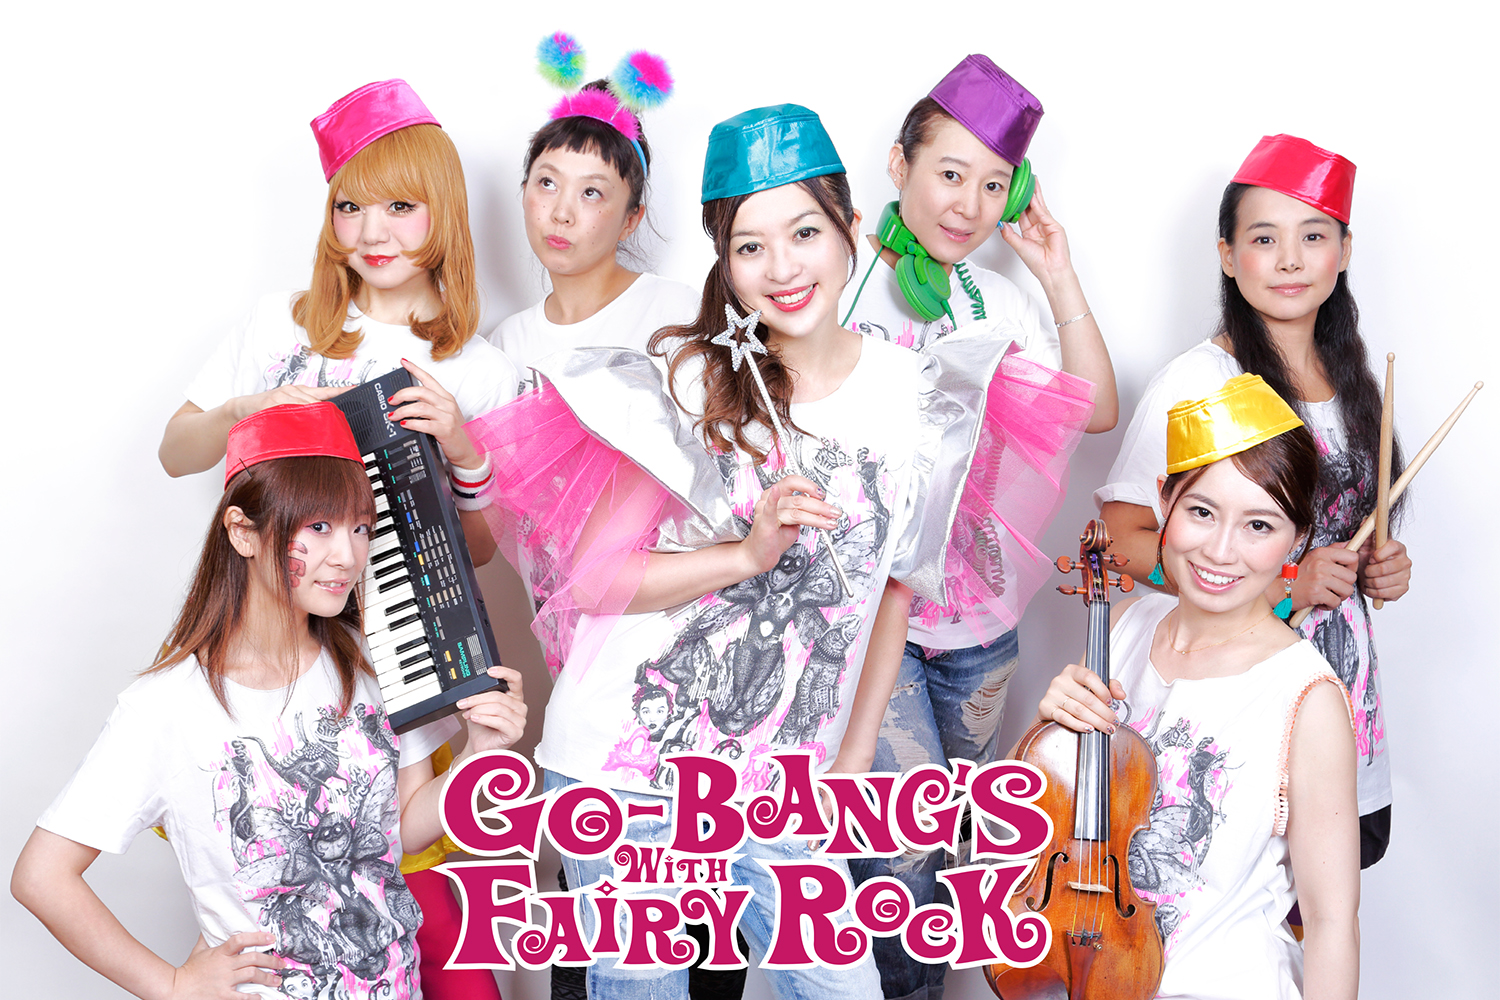 http://rooftop.cc/news/2015/08/24/GO-BANG%27S%20with%20Fairy%20Rock2-2.jpg